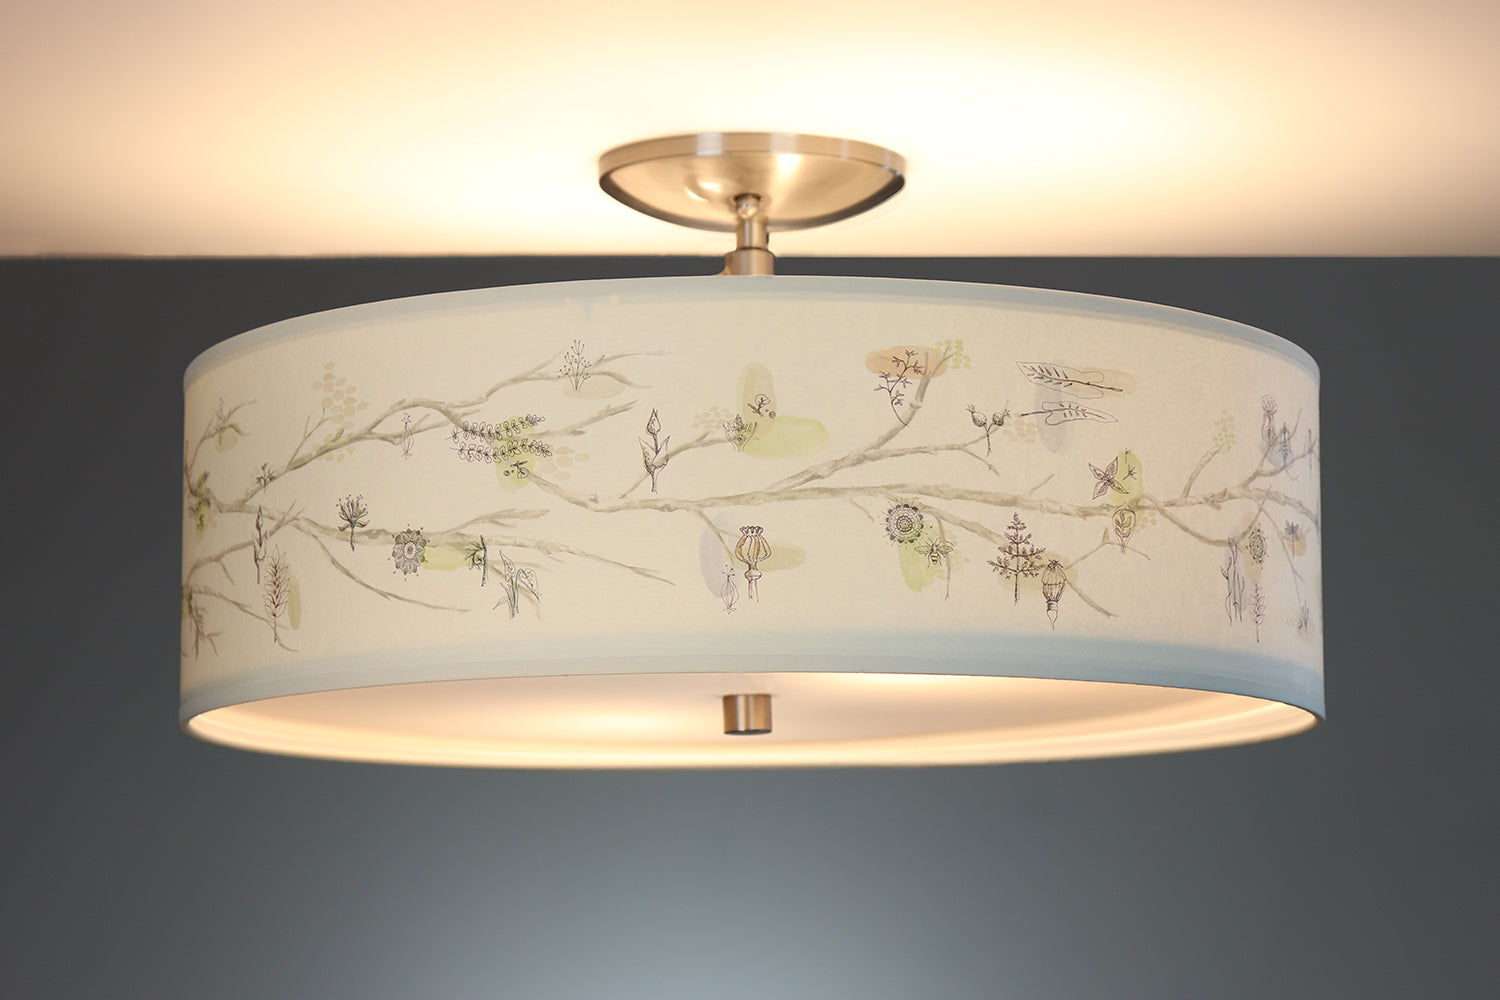 Janna Ugone & Co Ceiling Fixture 16" / Raw Brass Ceiling Lamp in Artful Branch